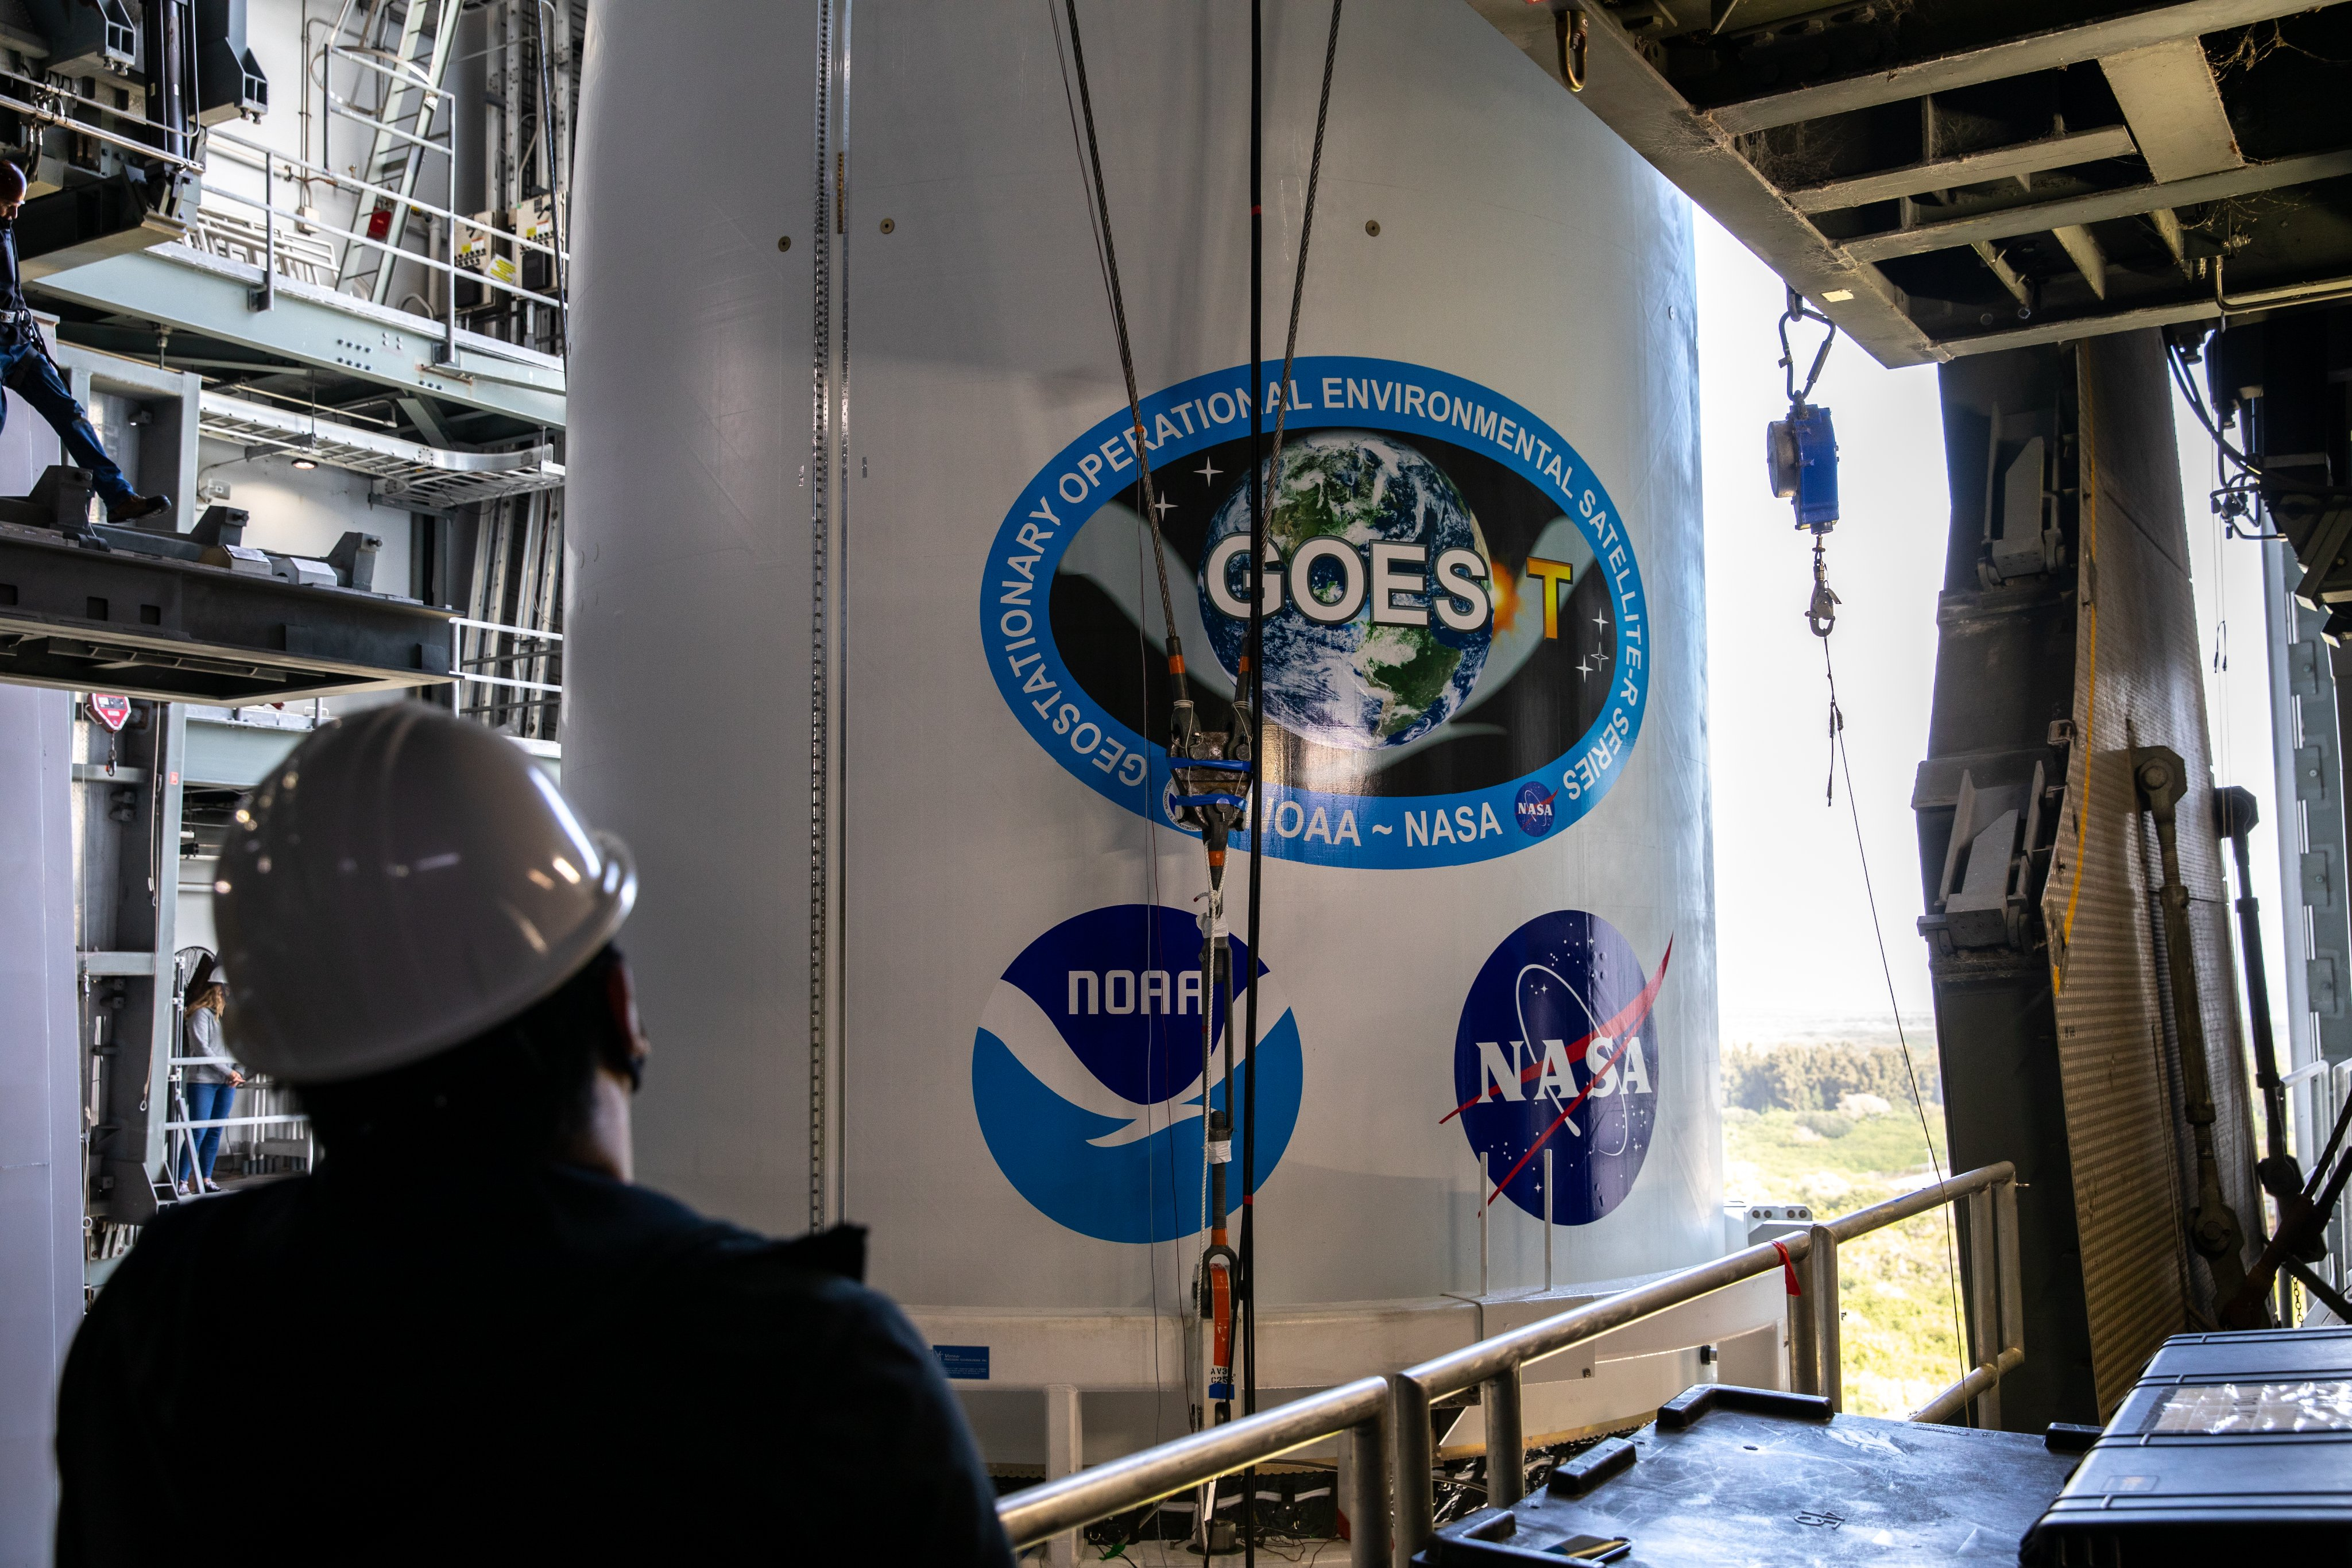 A United Launch Alliance technician monitors the progress of NOAA's GOES-T weather satellite, enclosed in its payload fairing, as it is moved into the Vertical Integration Facility at Space Launch Complex 41 at Cape Canaveral Space Force Station in Florida to meet its Atlas V rocket on Feb. 17, 2022. The satellite will launch on March 1, 2022.